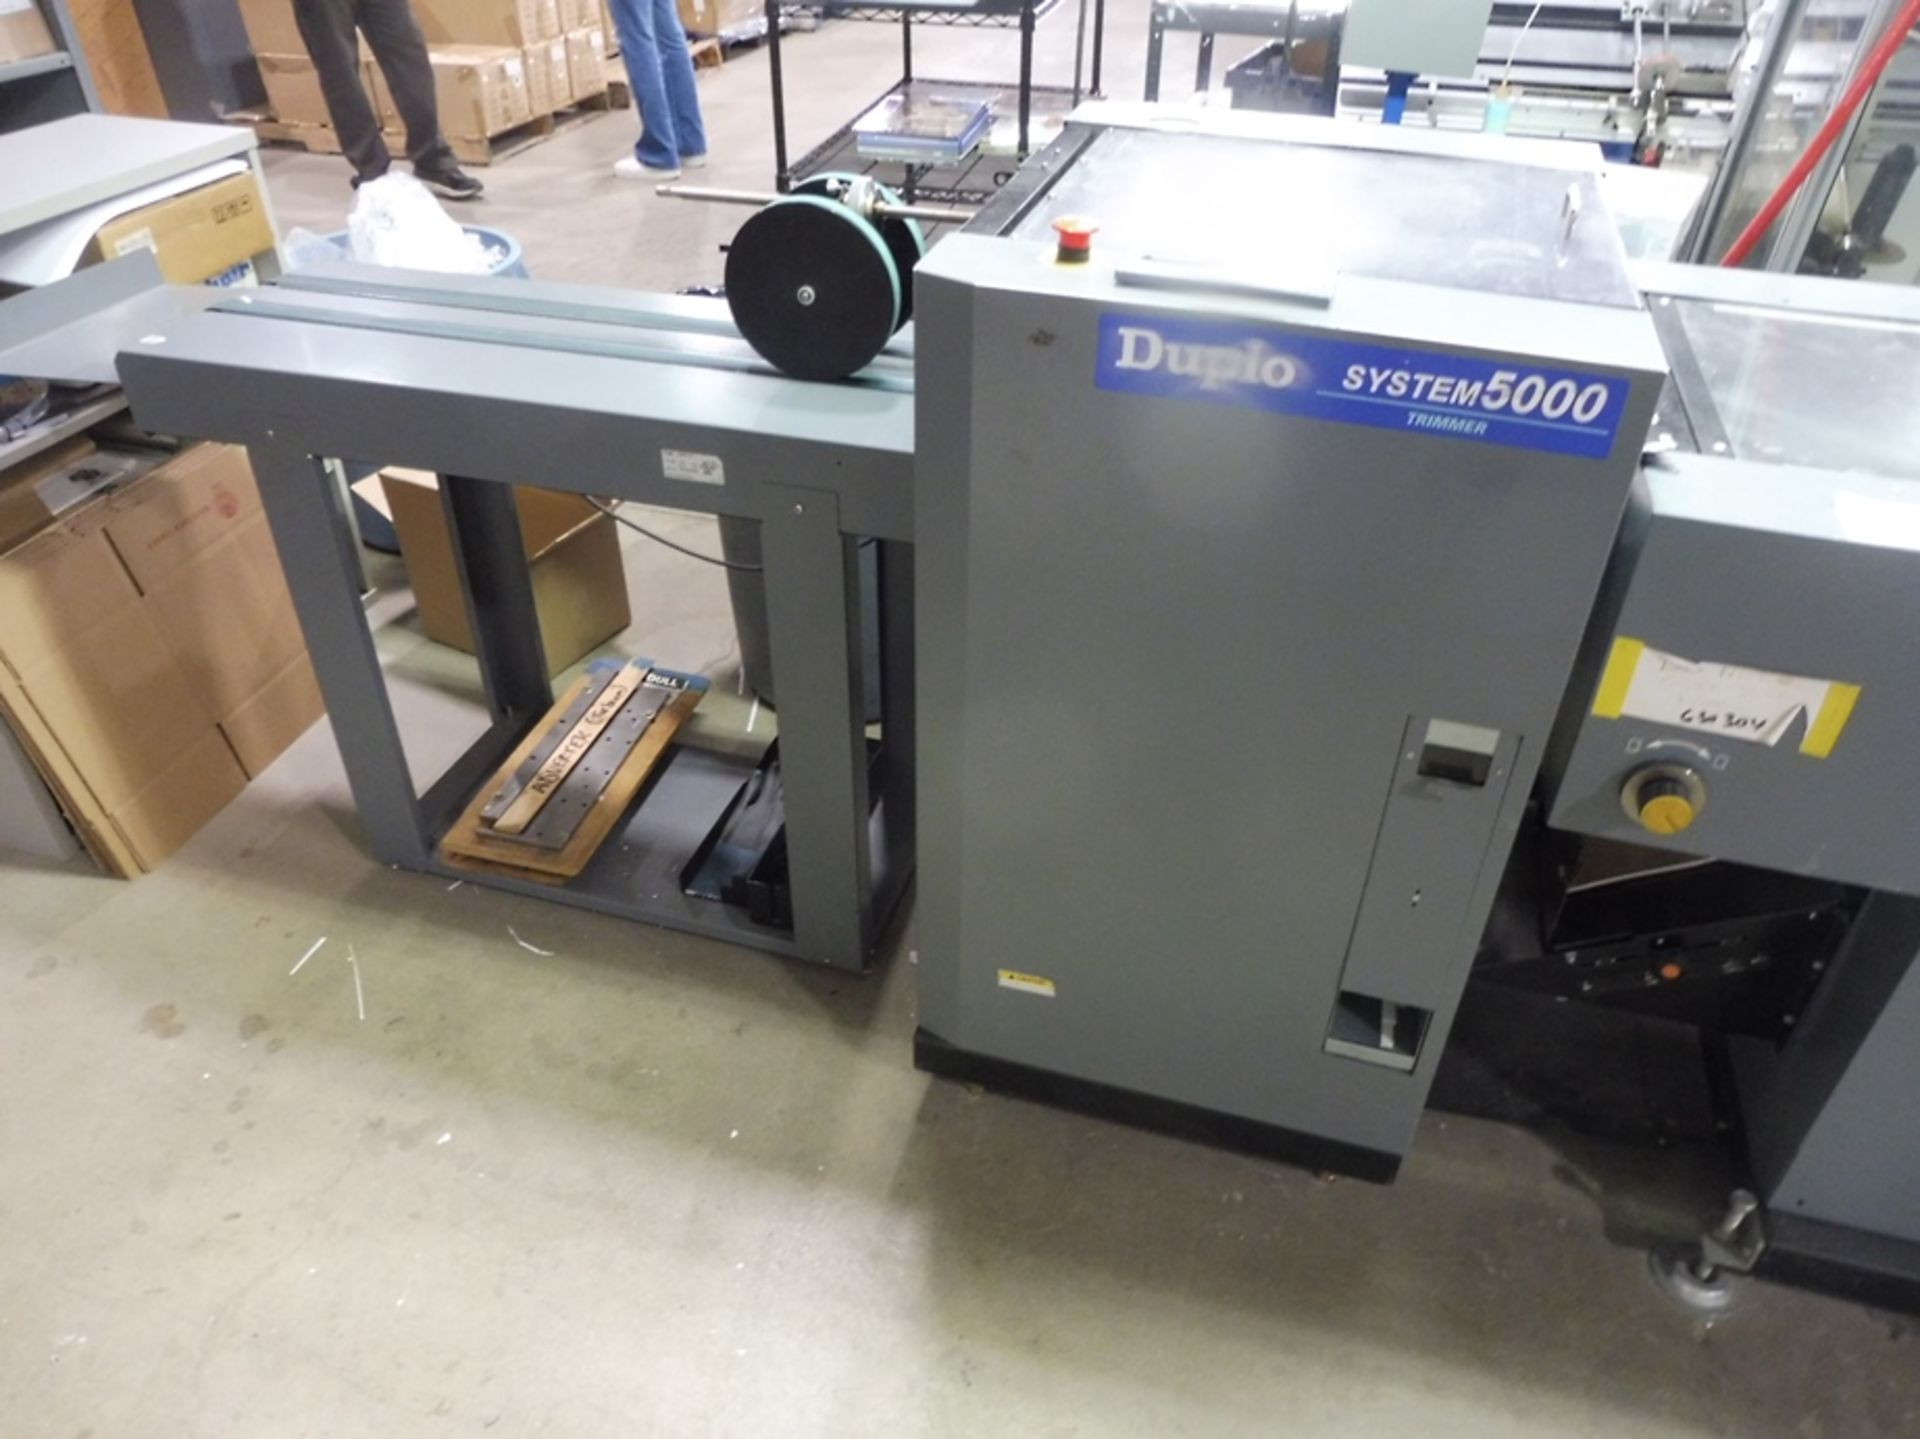 2006 DUPLO "System 5000" Booklet Making System, S/N: 031000799, 060900820, 060501069, W/ Stacking - Image 14 of 19